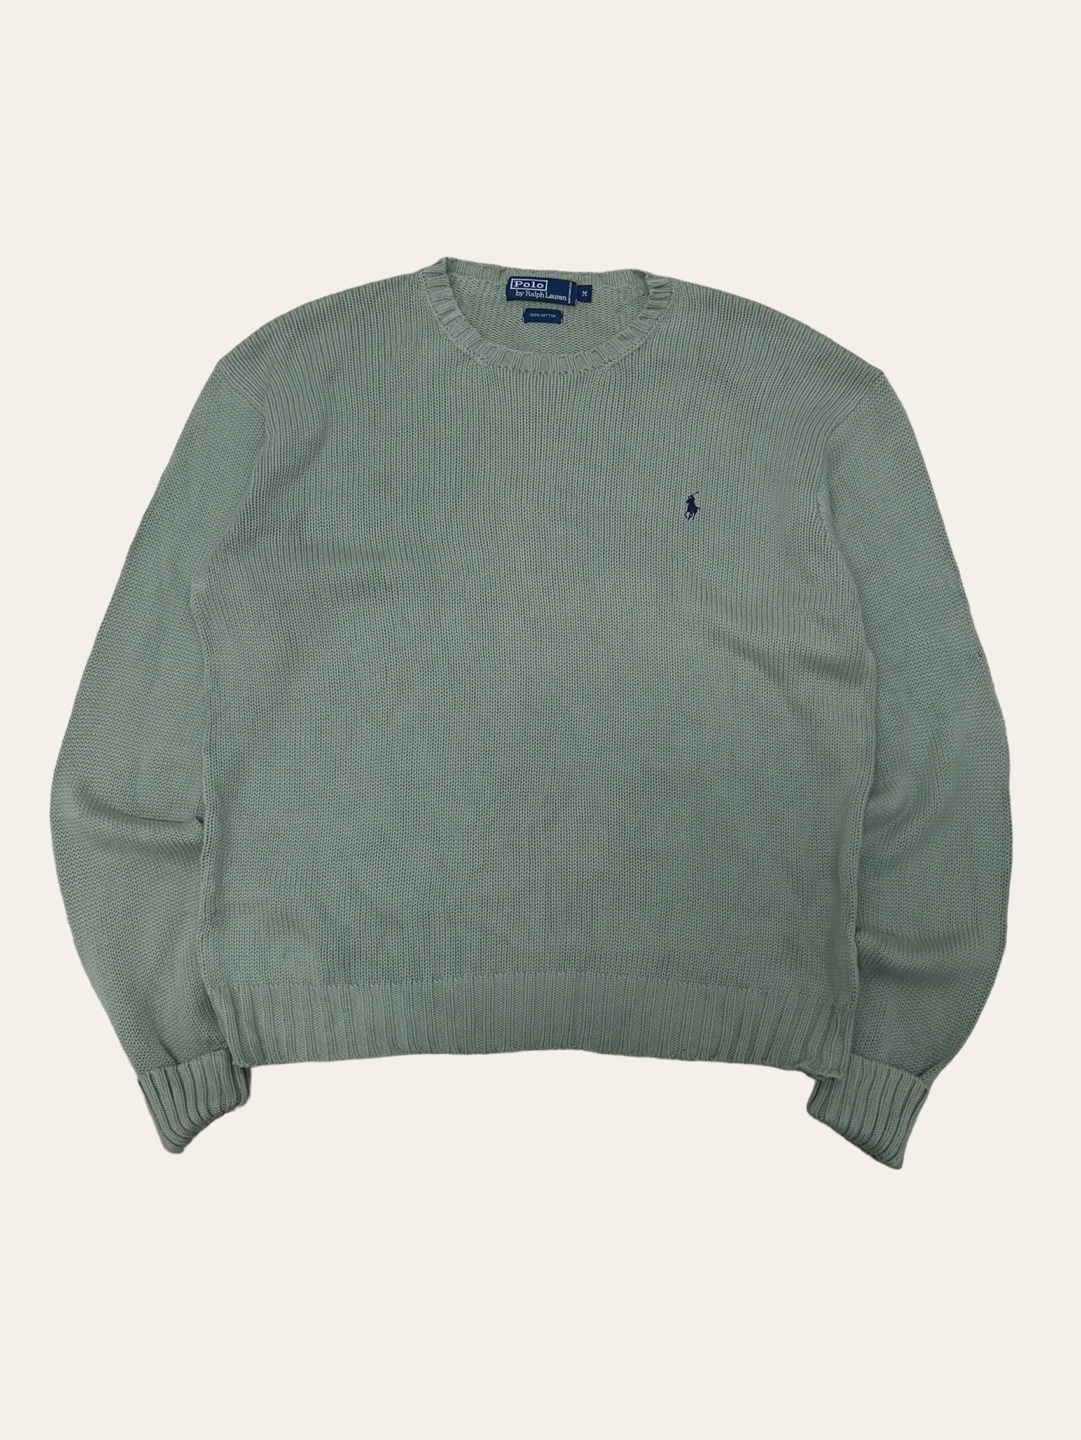 (From USA)Polo ralph lauren emerald color cotton crewneck sweater M